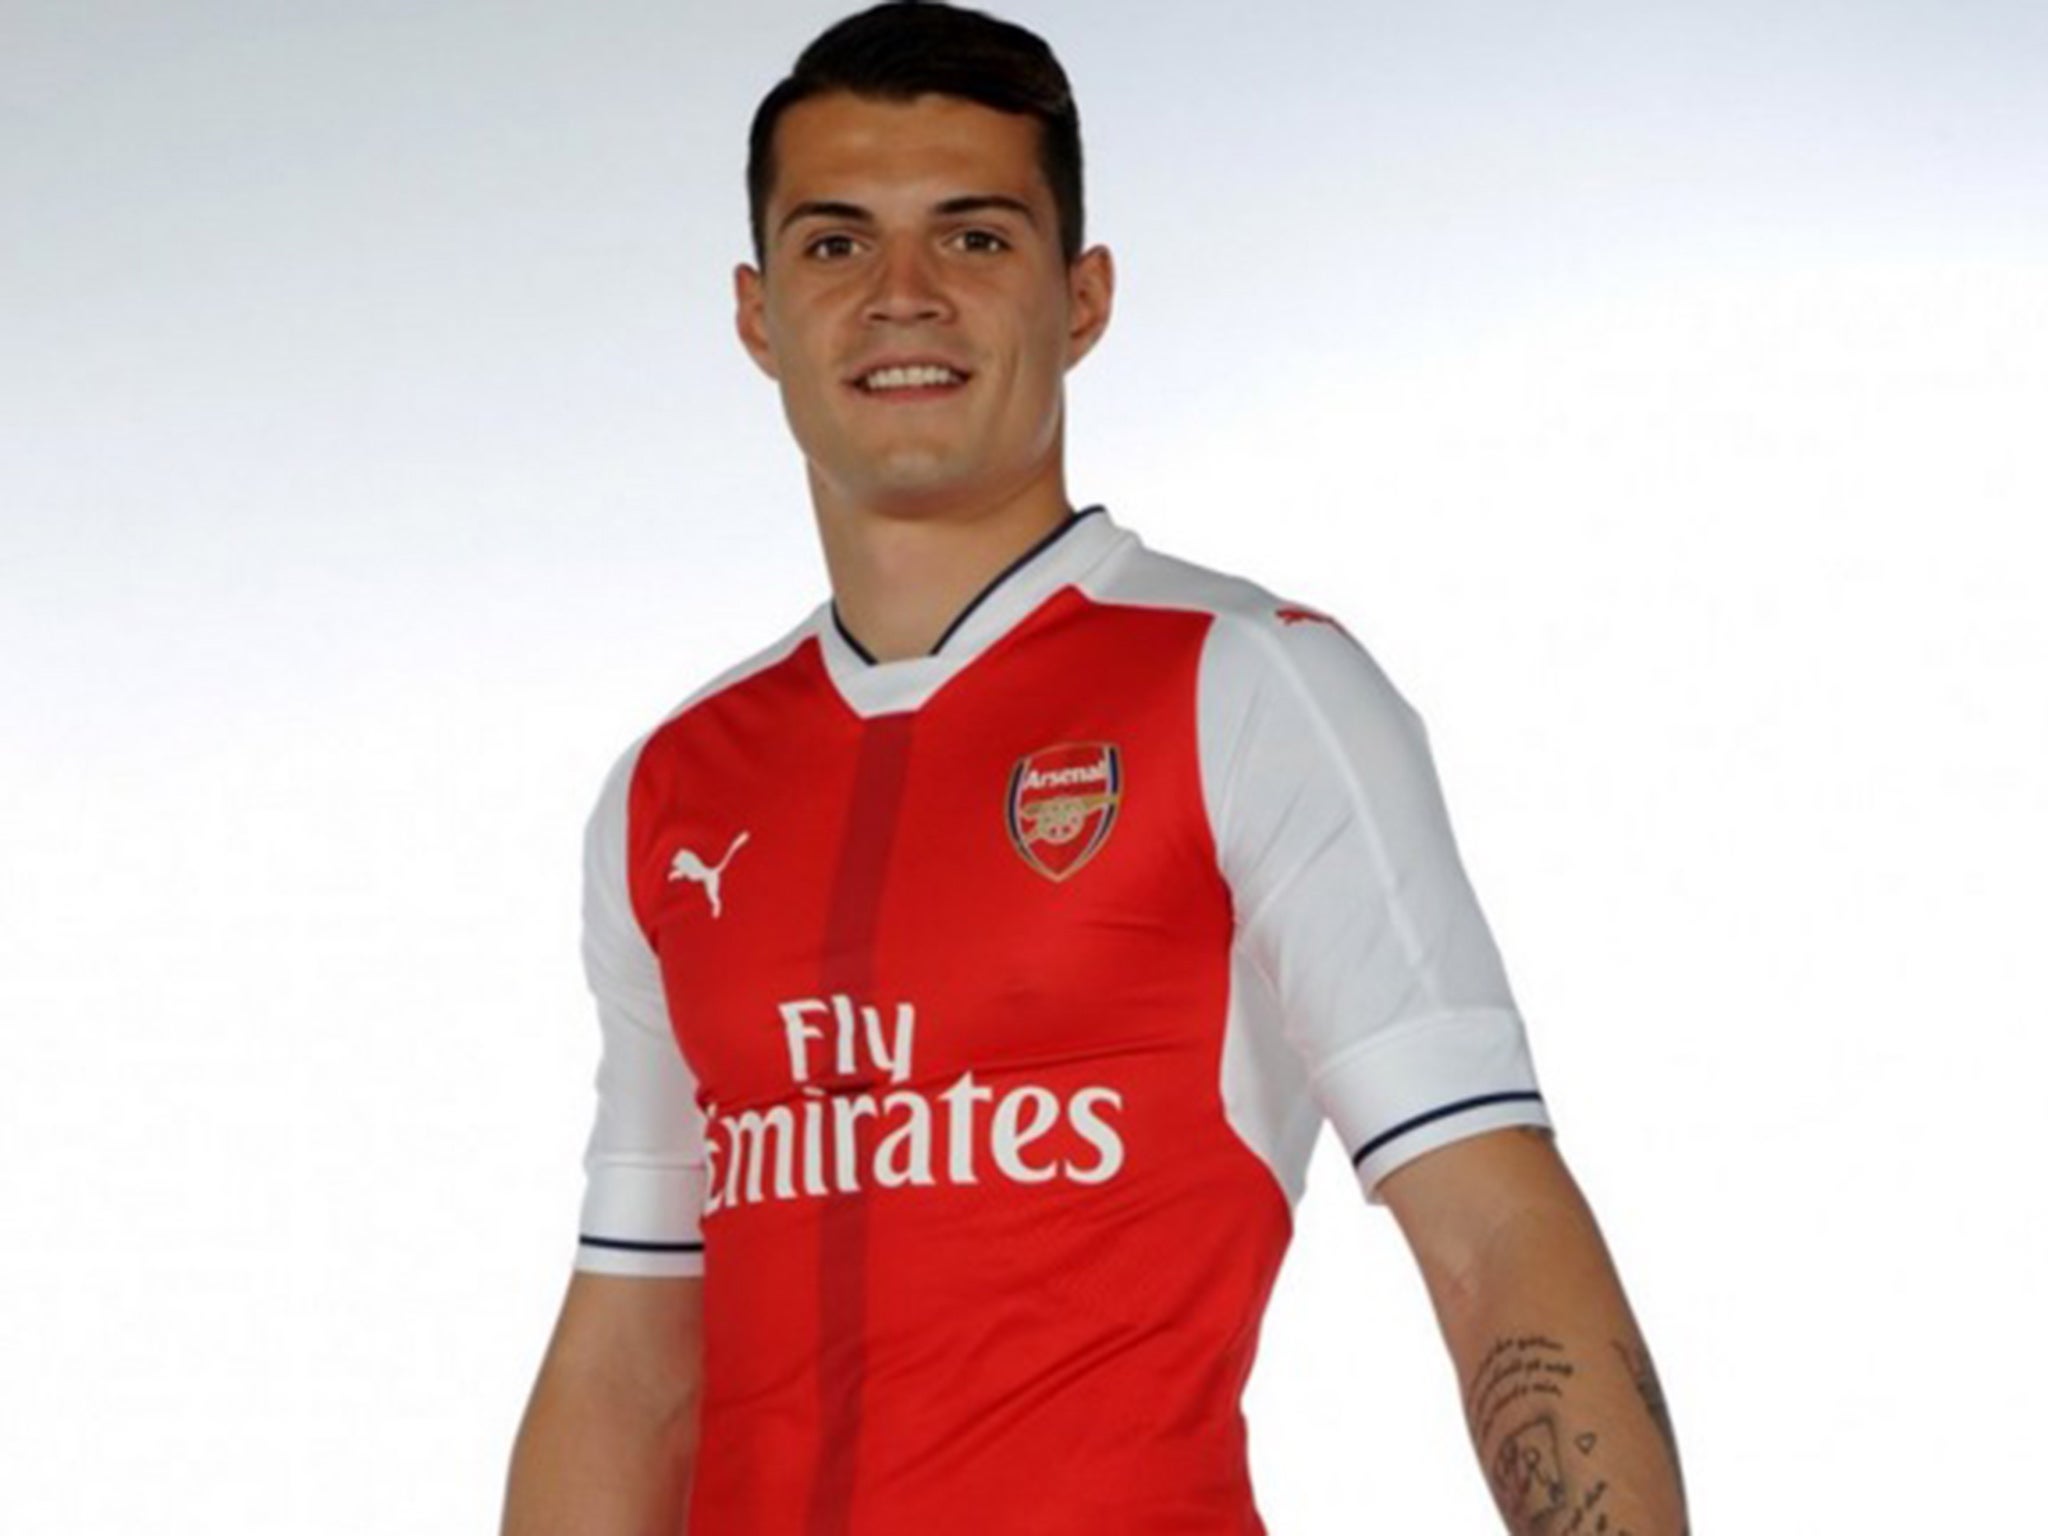 Granit Xhaka poses in an Arsenal shirt following completion of his transfer to the Premier League